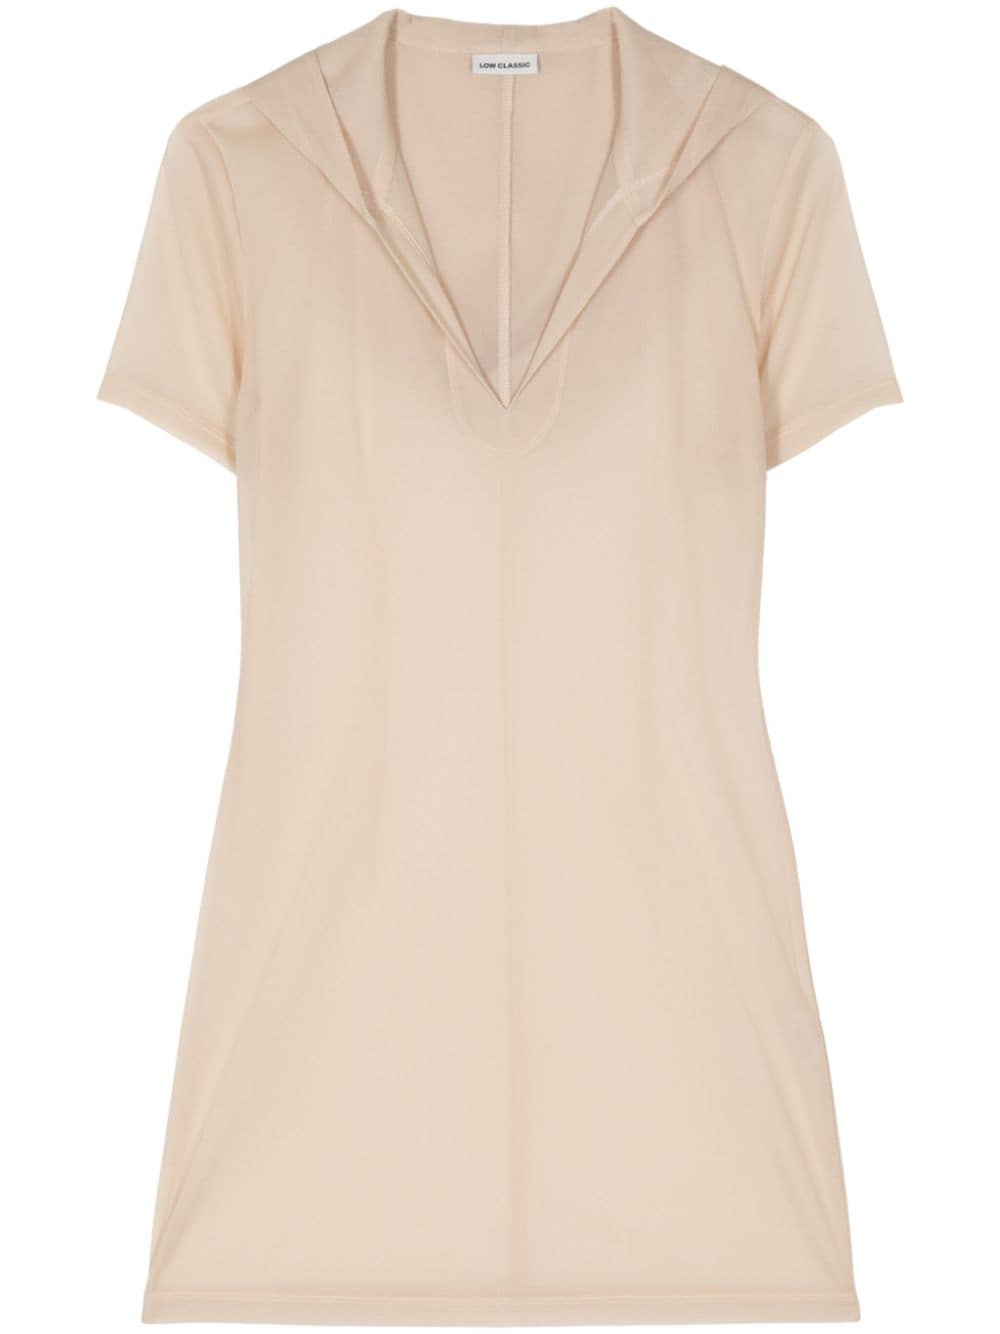 Low Classic sheer hooded top - Nude